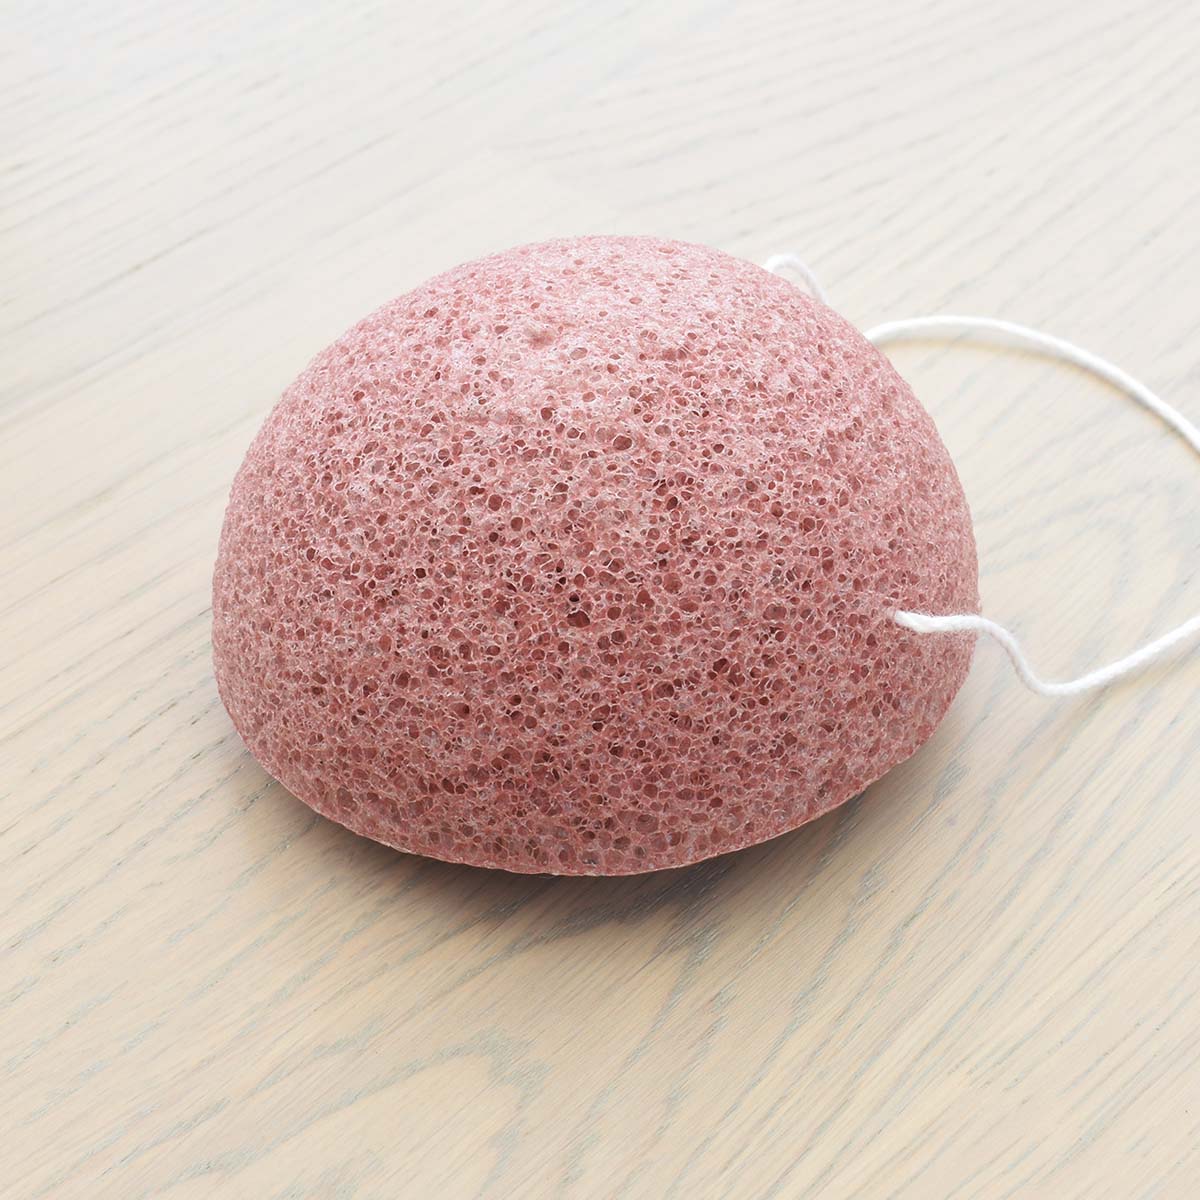 konjac sponge for deep cleansing skin/bio with thysiamore